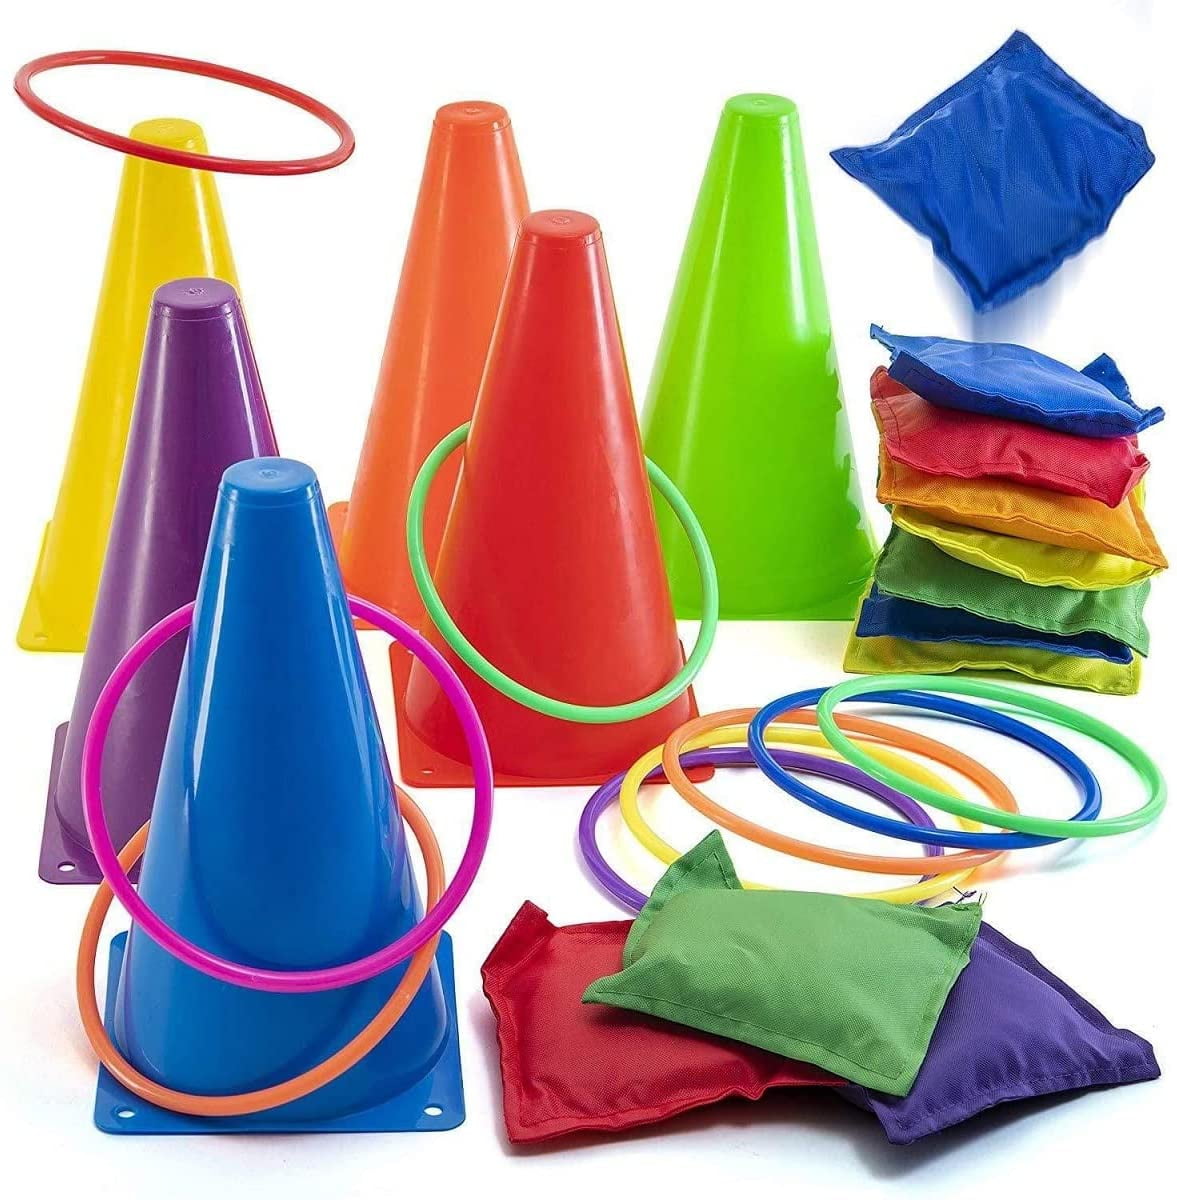 24pk Assorted Bean Bags Toss Game Accesories Backyard Game Xmas Gifts 